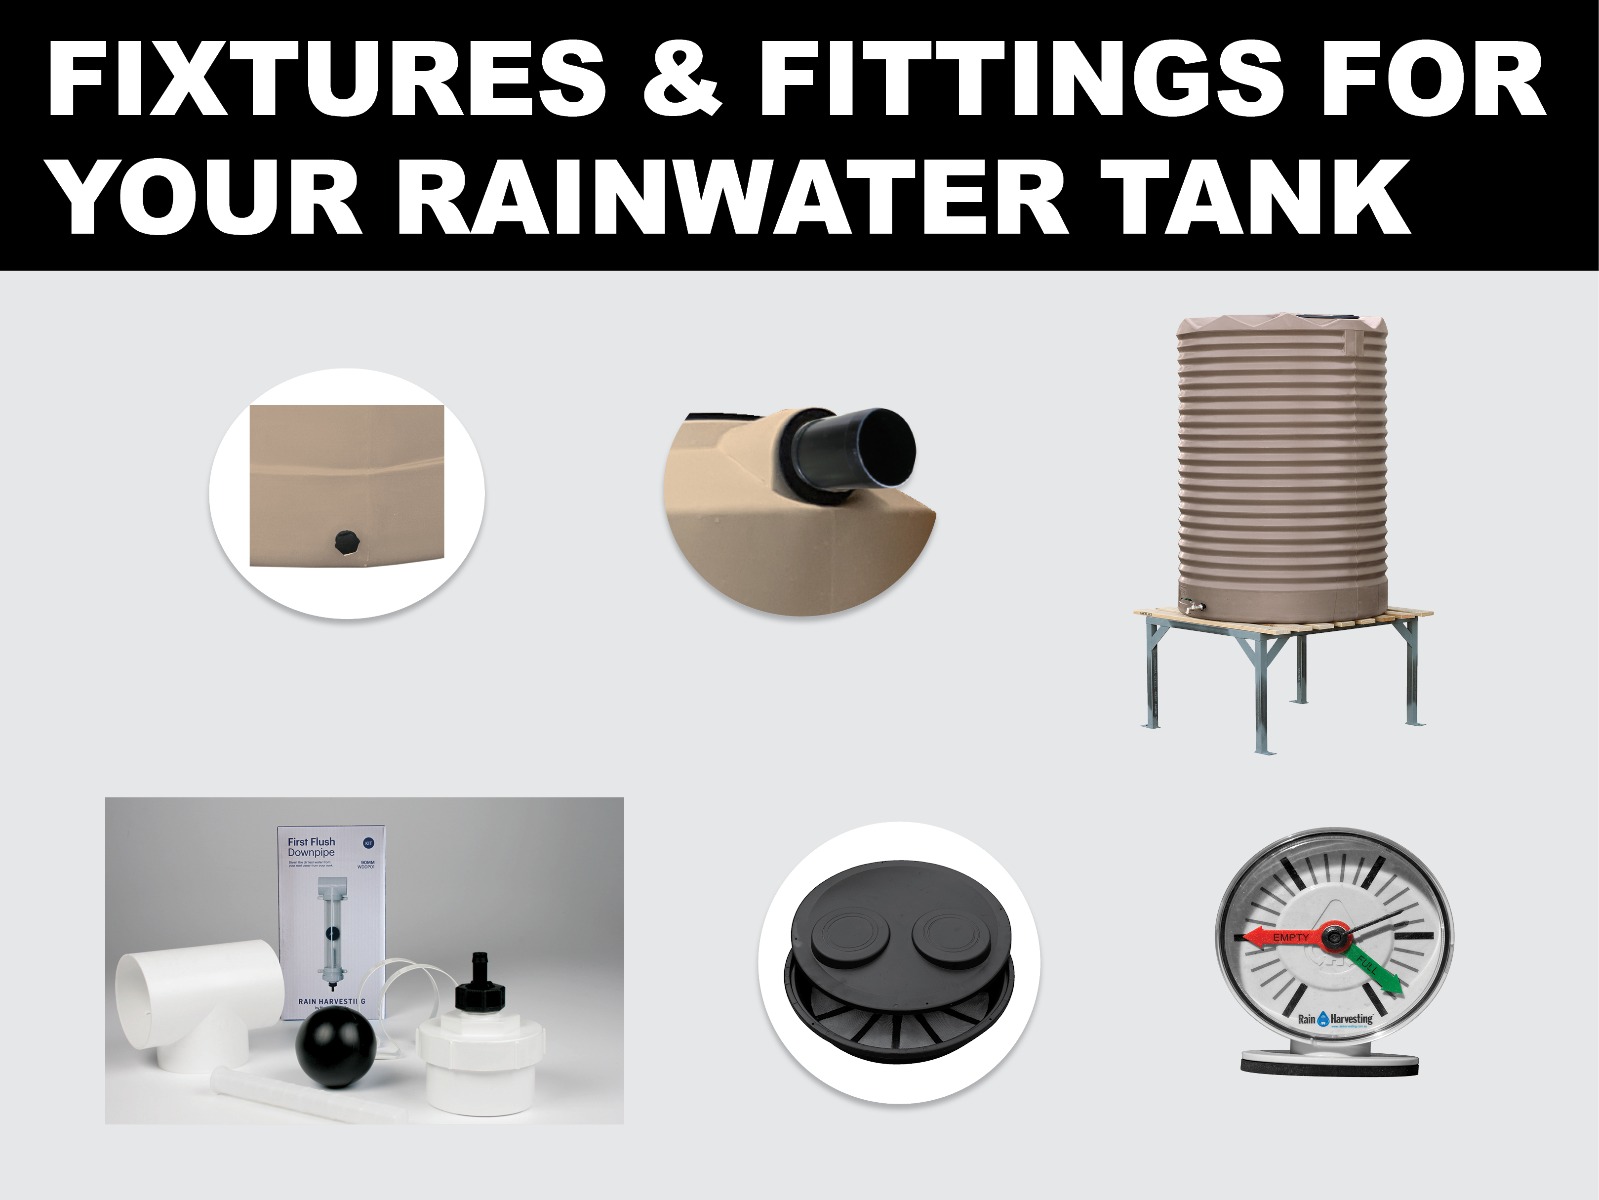 Fixtures and fittings for rainwater tanks